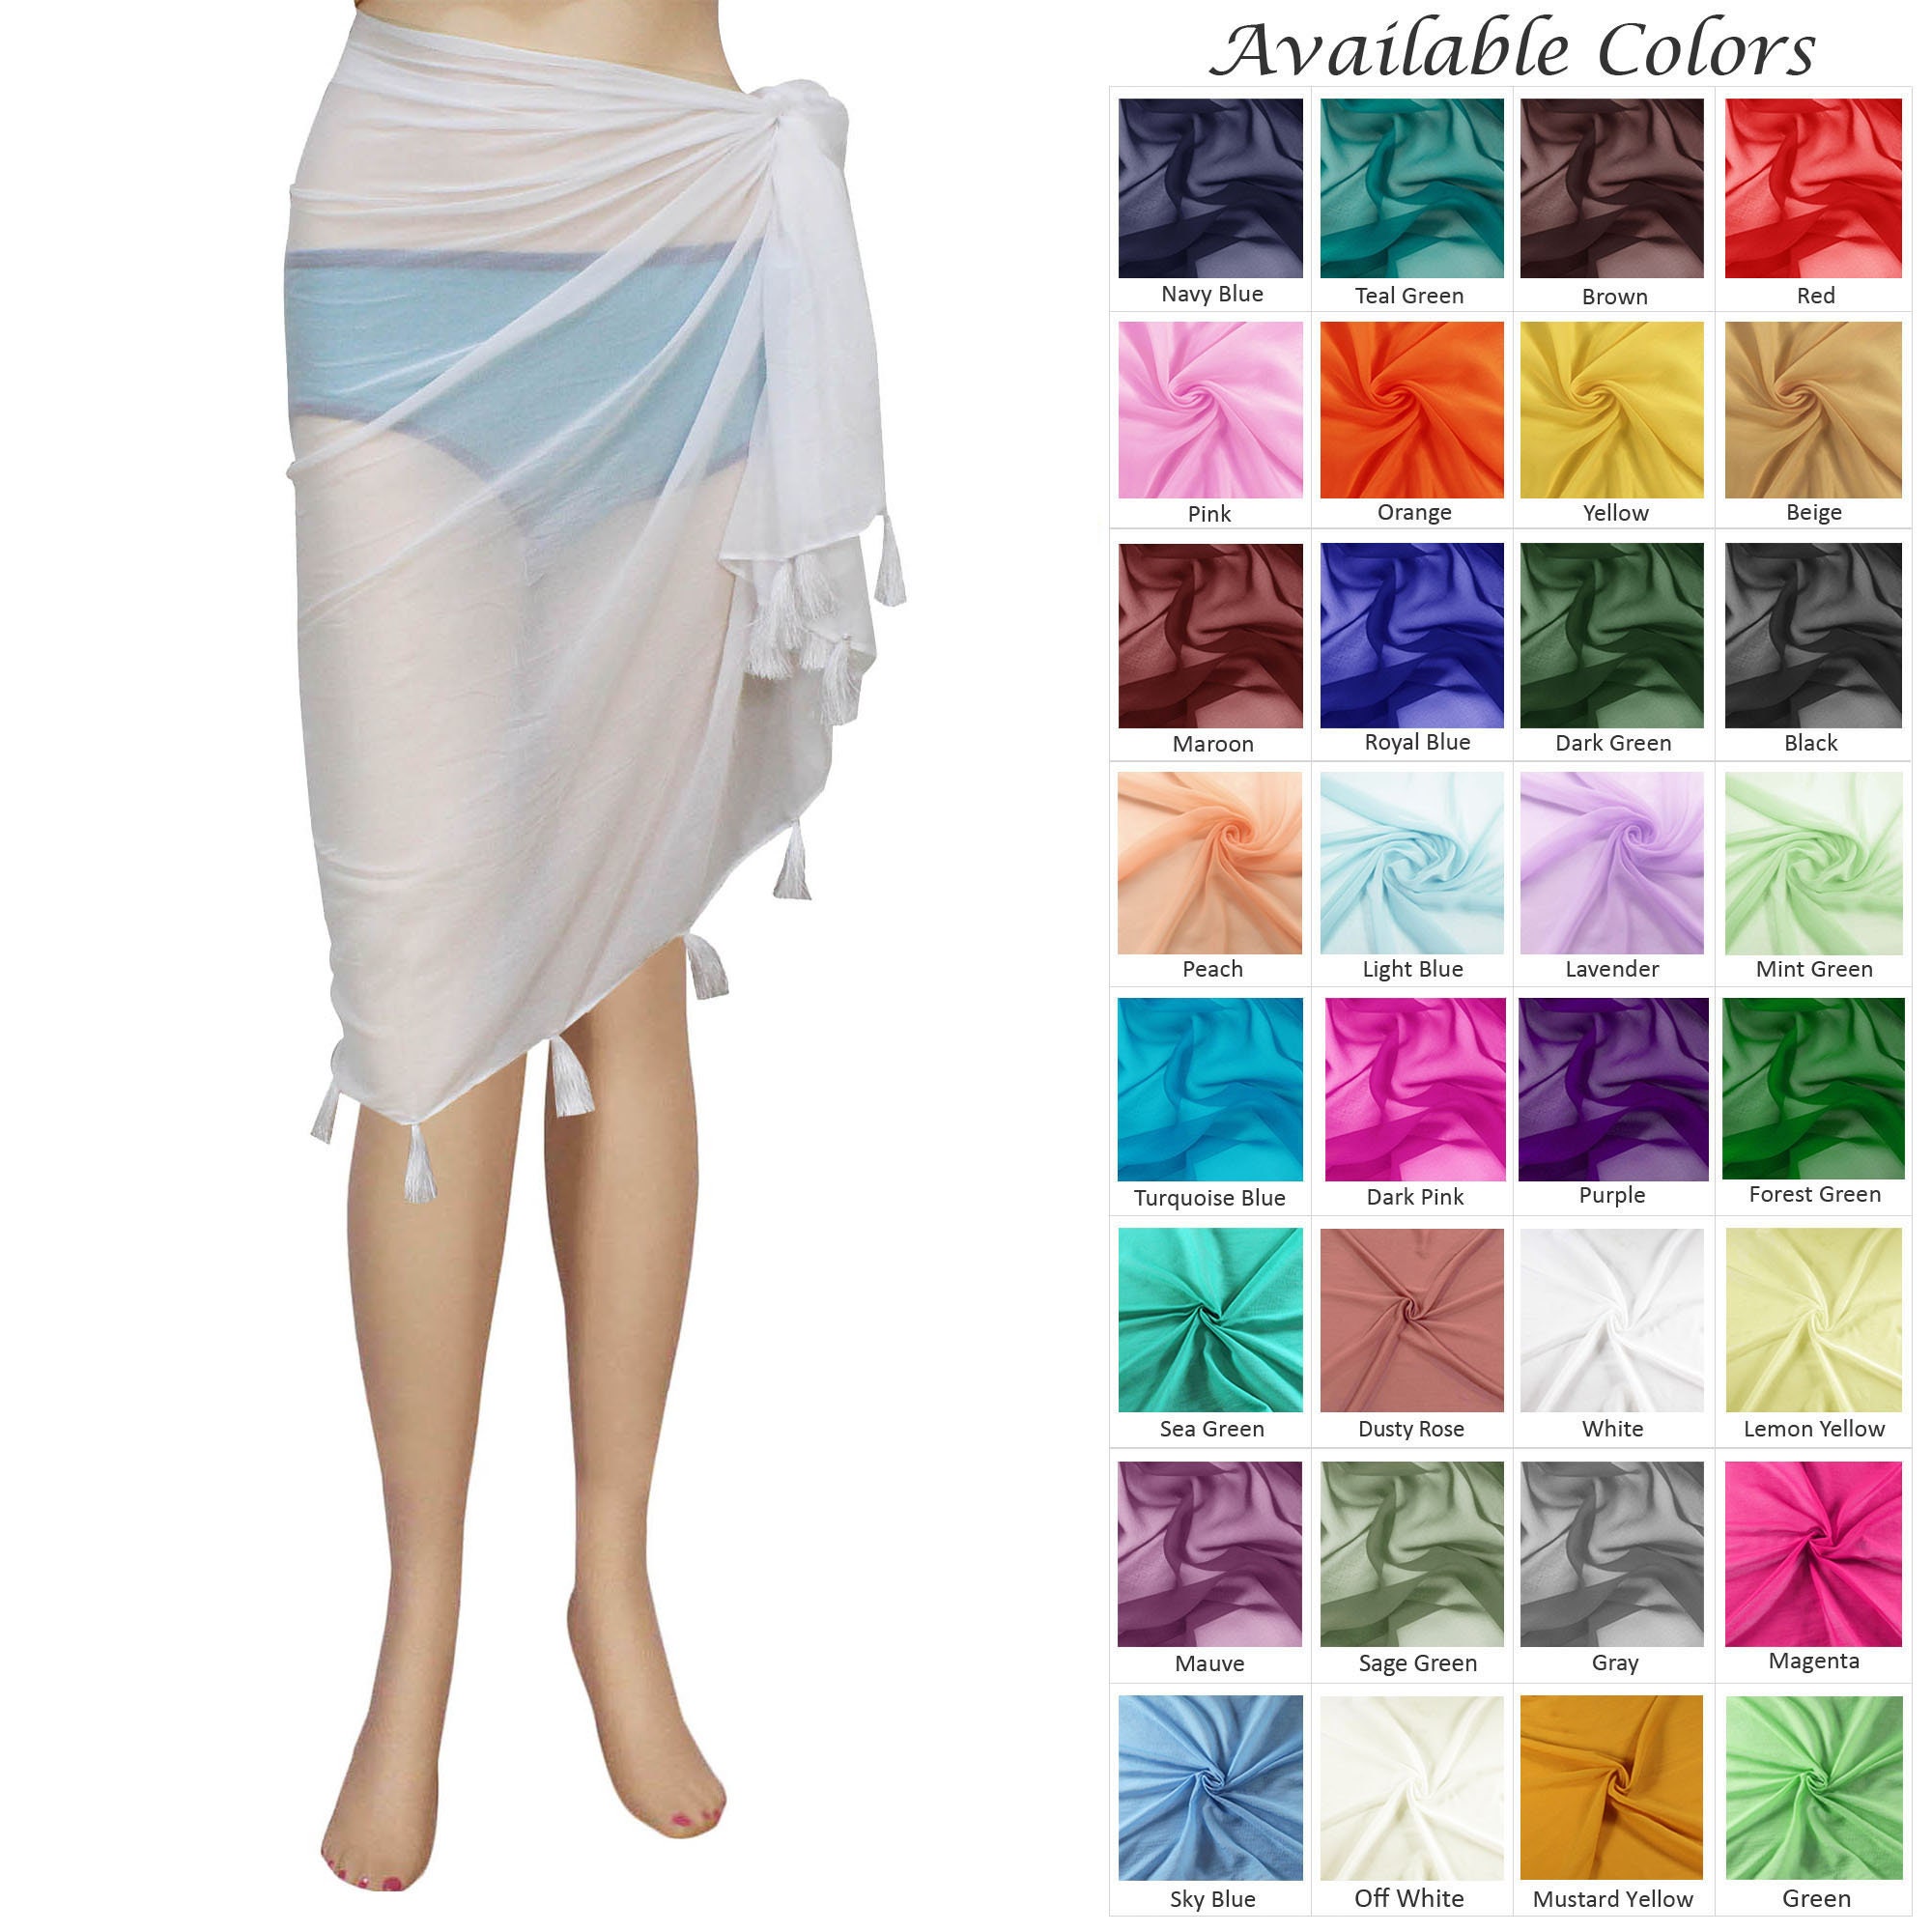 Women's Bathing Suit Cover Up Printed Beach Sarong Long Chiffon Scarf Pareo Wrap 